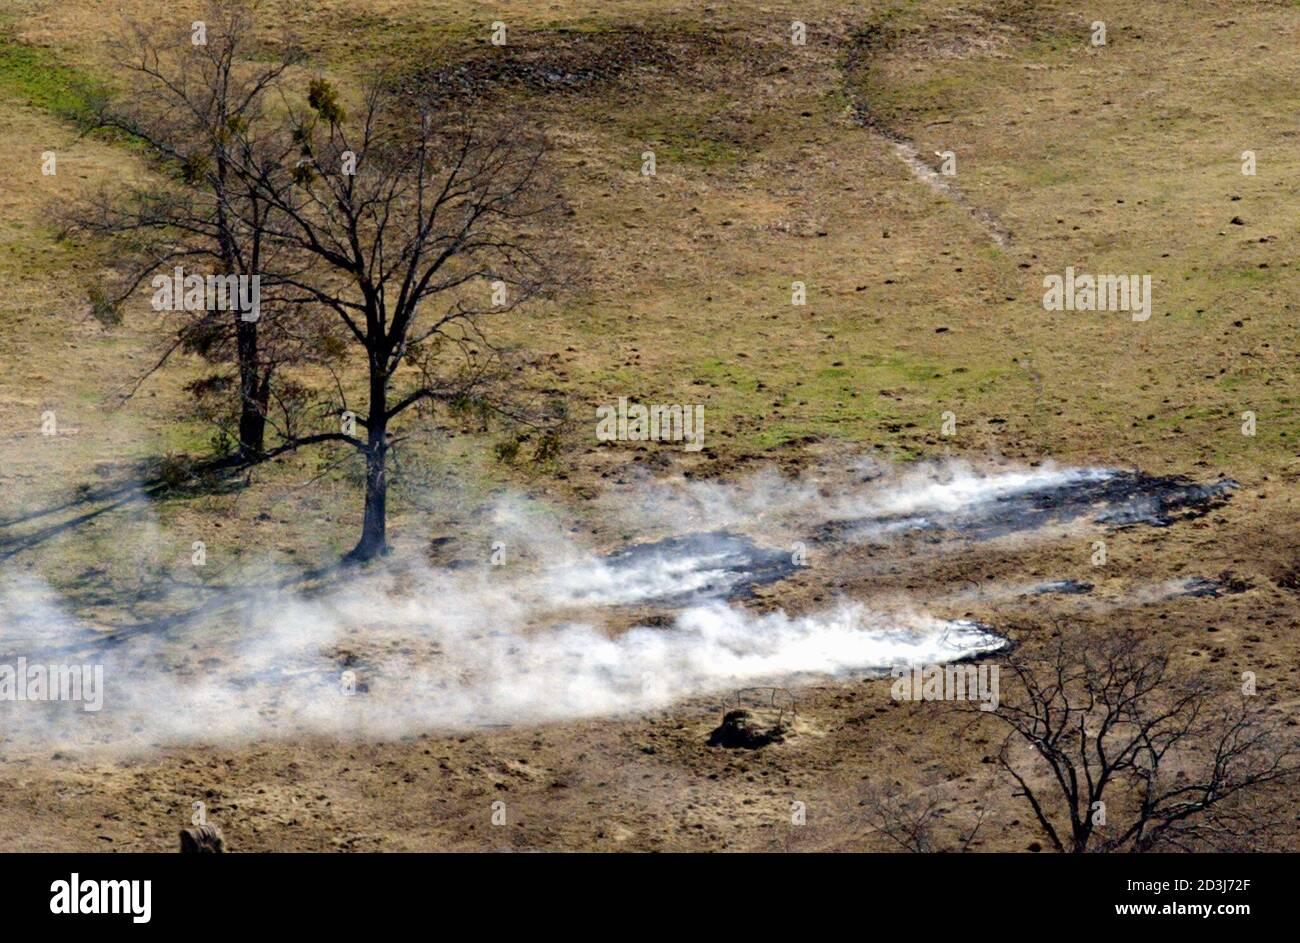 a-small-brush-fire-started-by-a-falling-